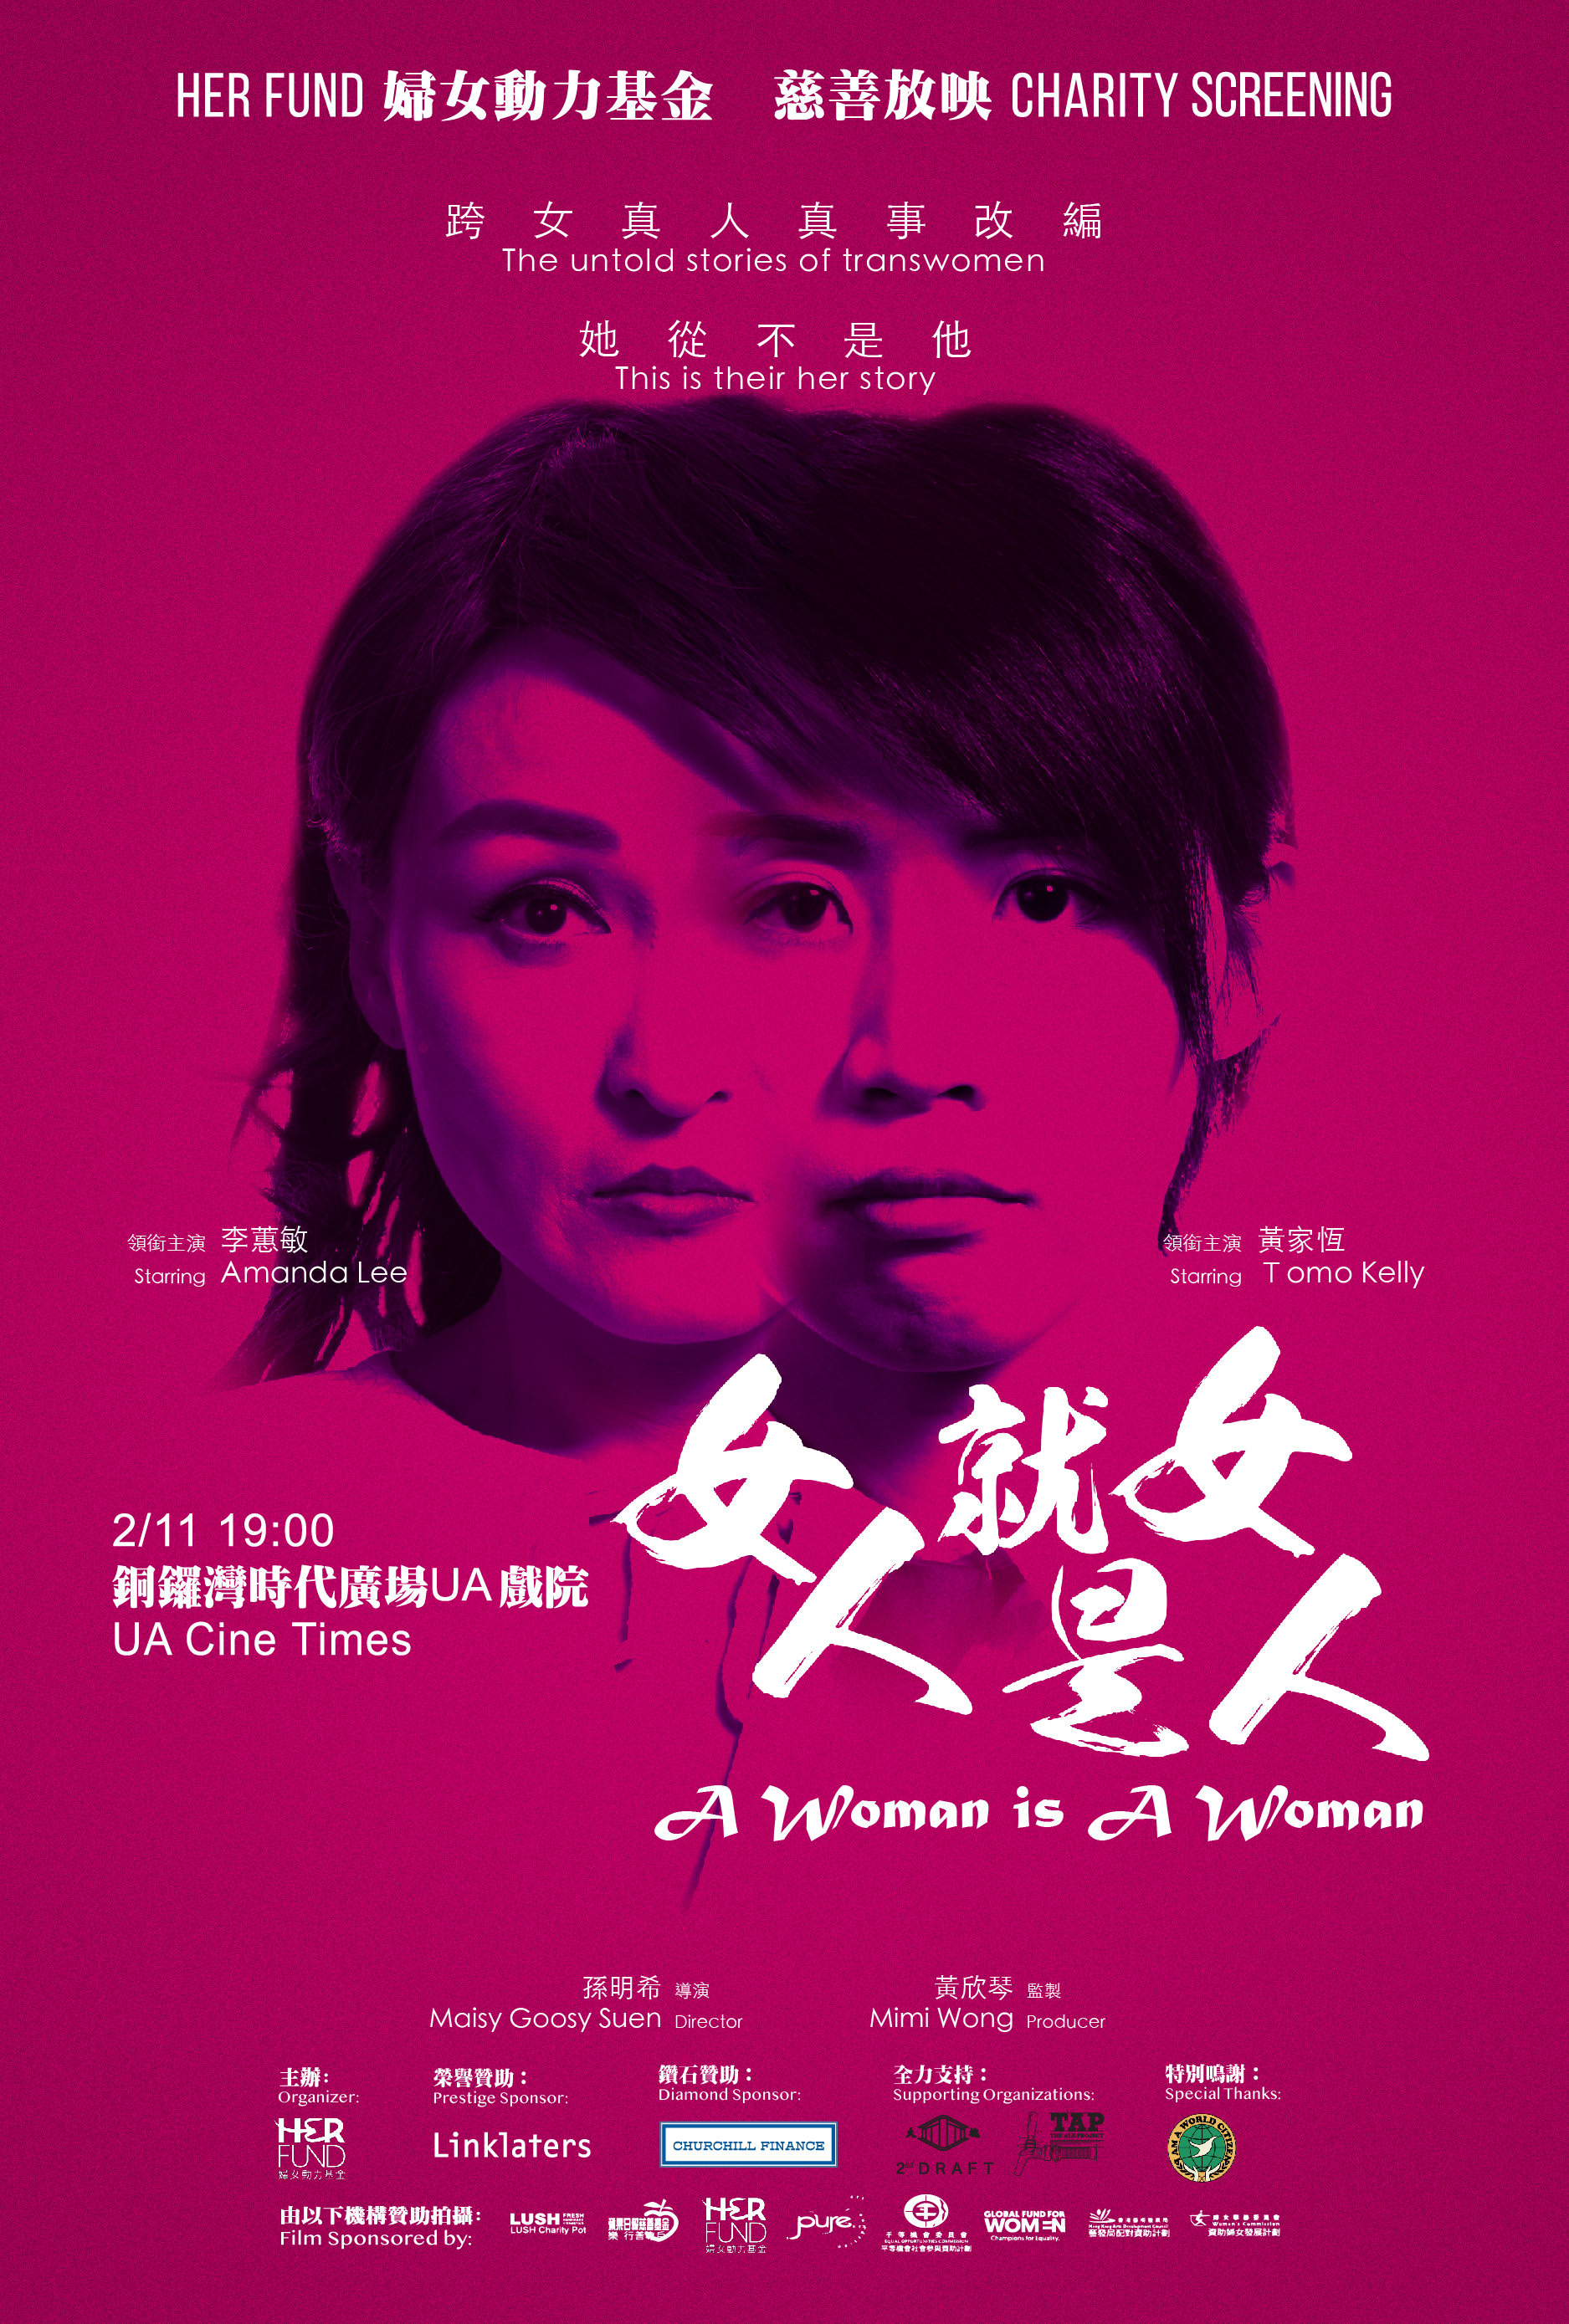 Poster of the film, featuring the faces of the two protagonists on a purple background